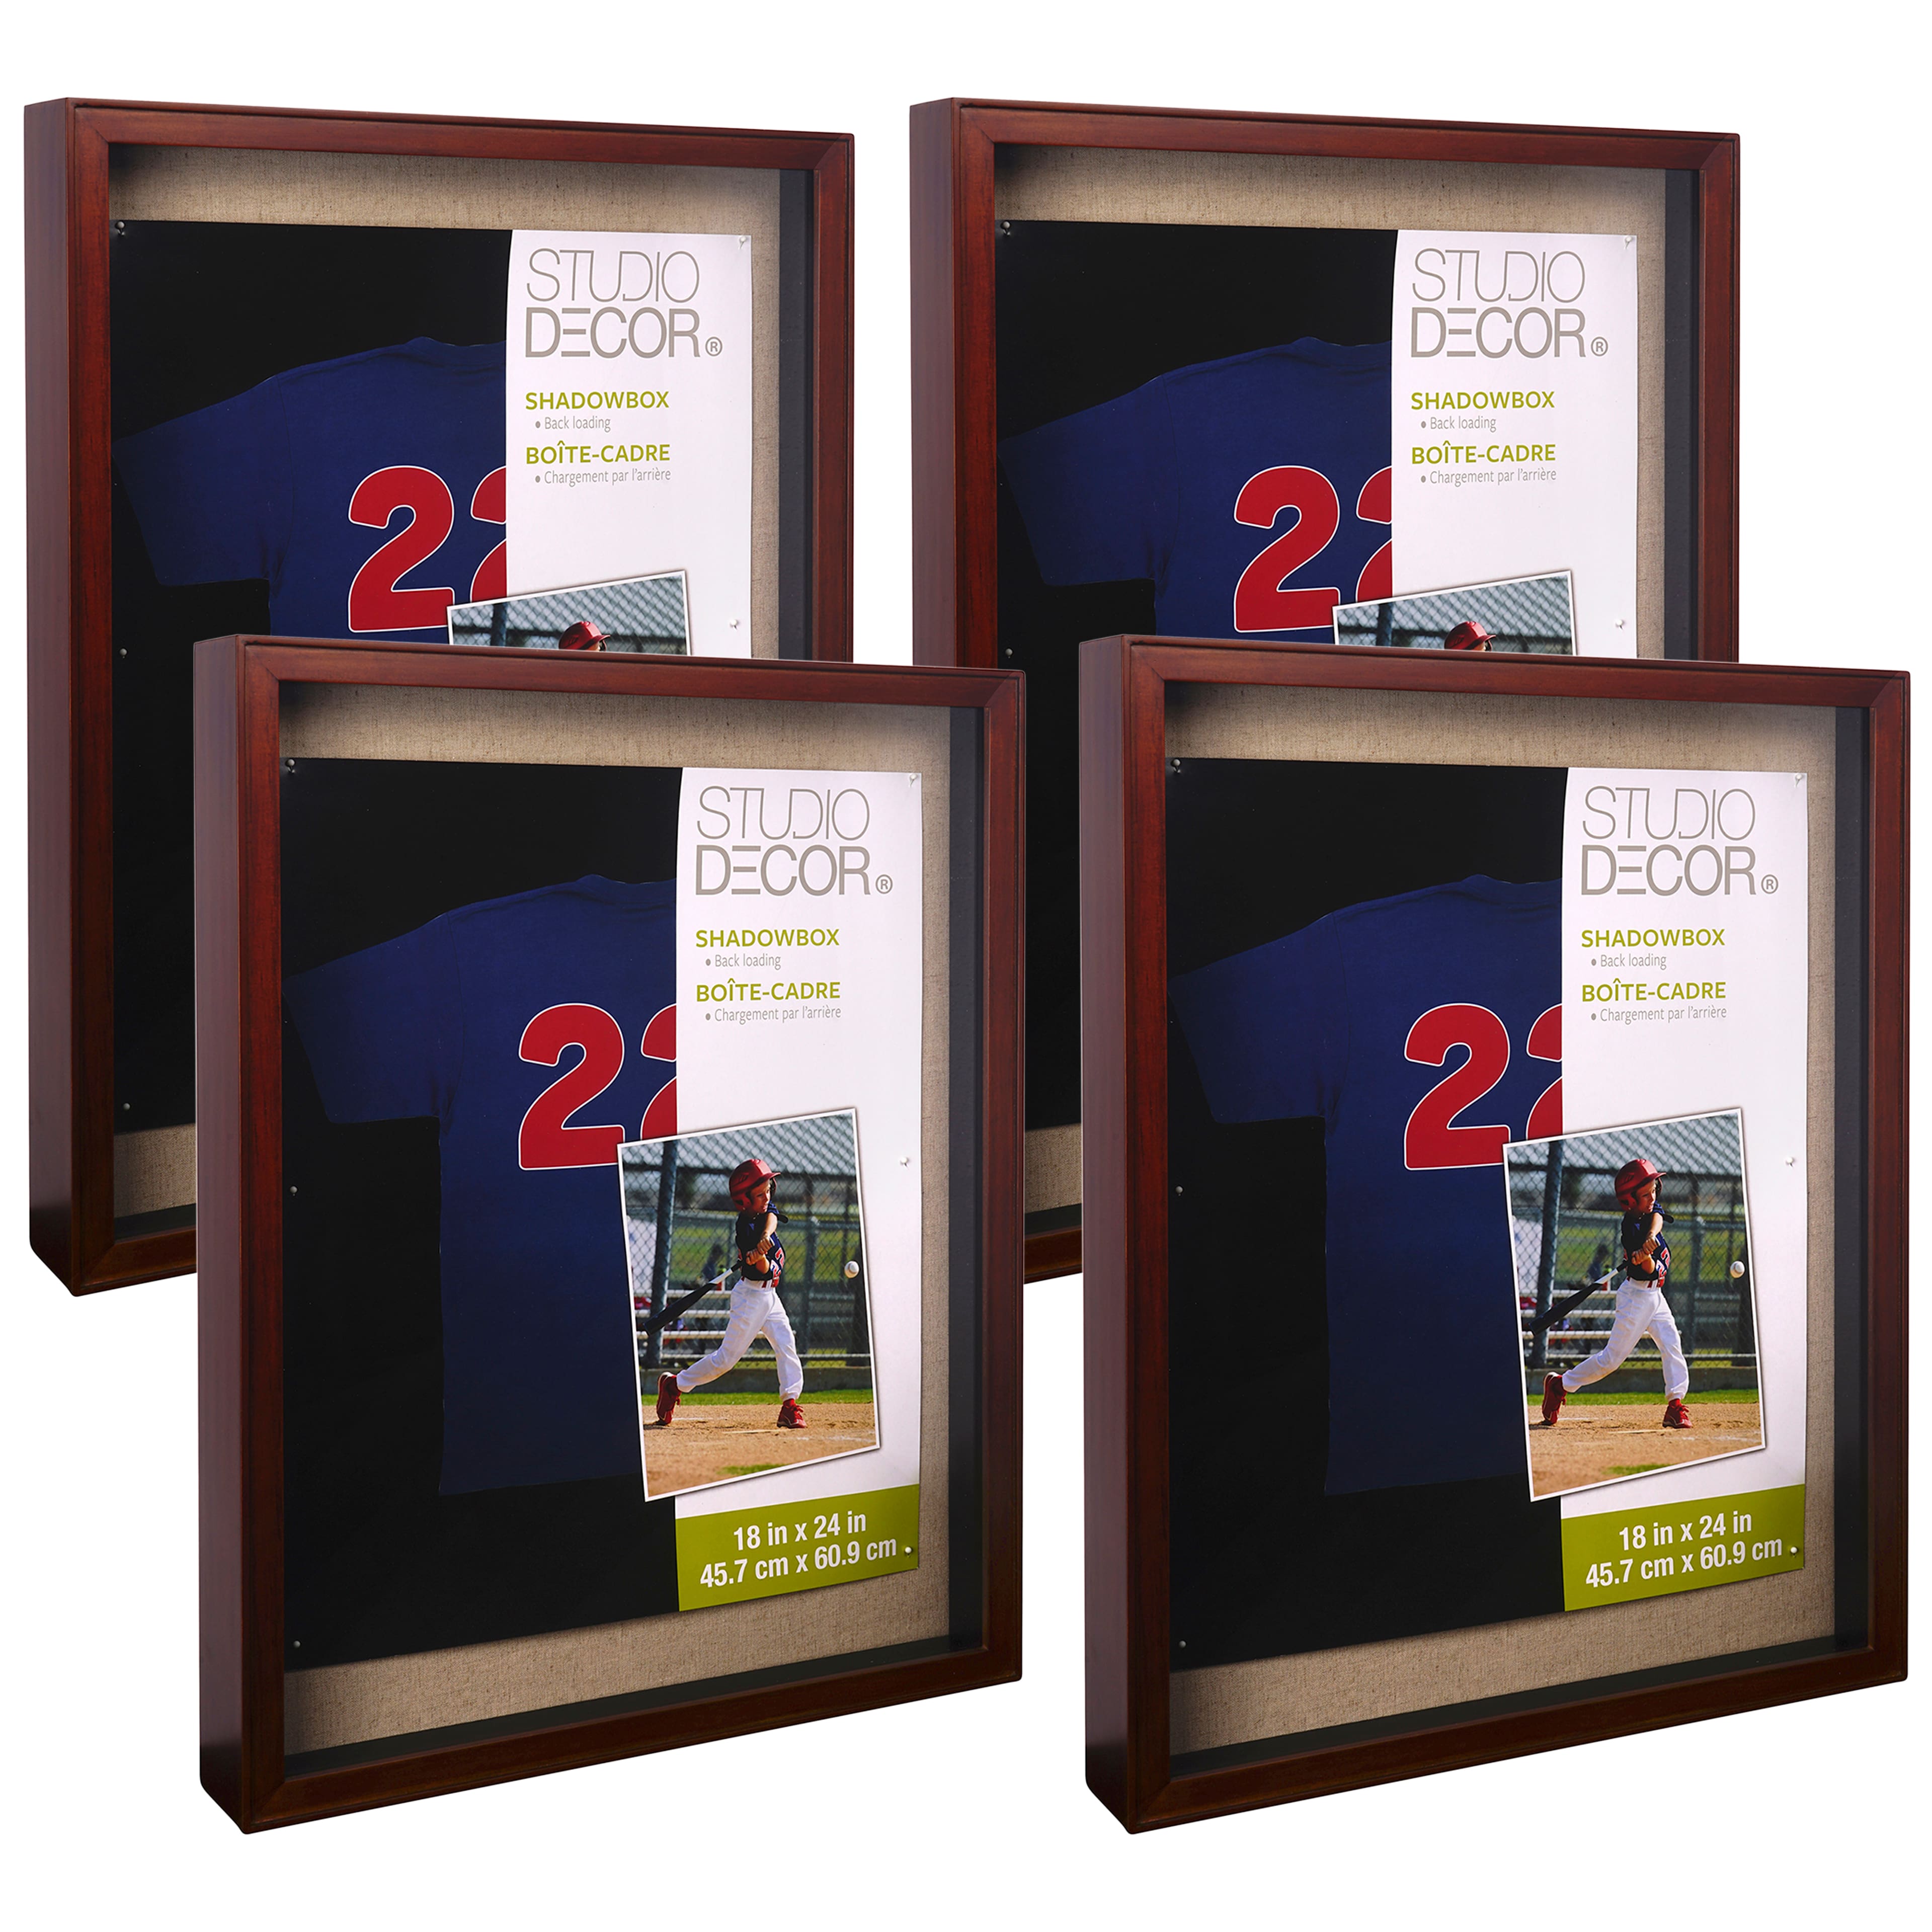 jersey display cases wholesale